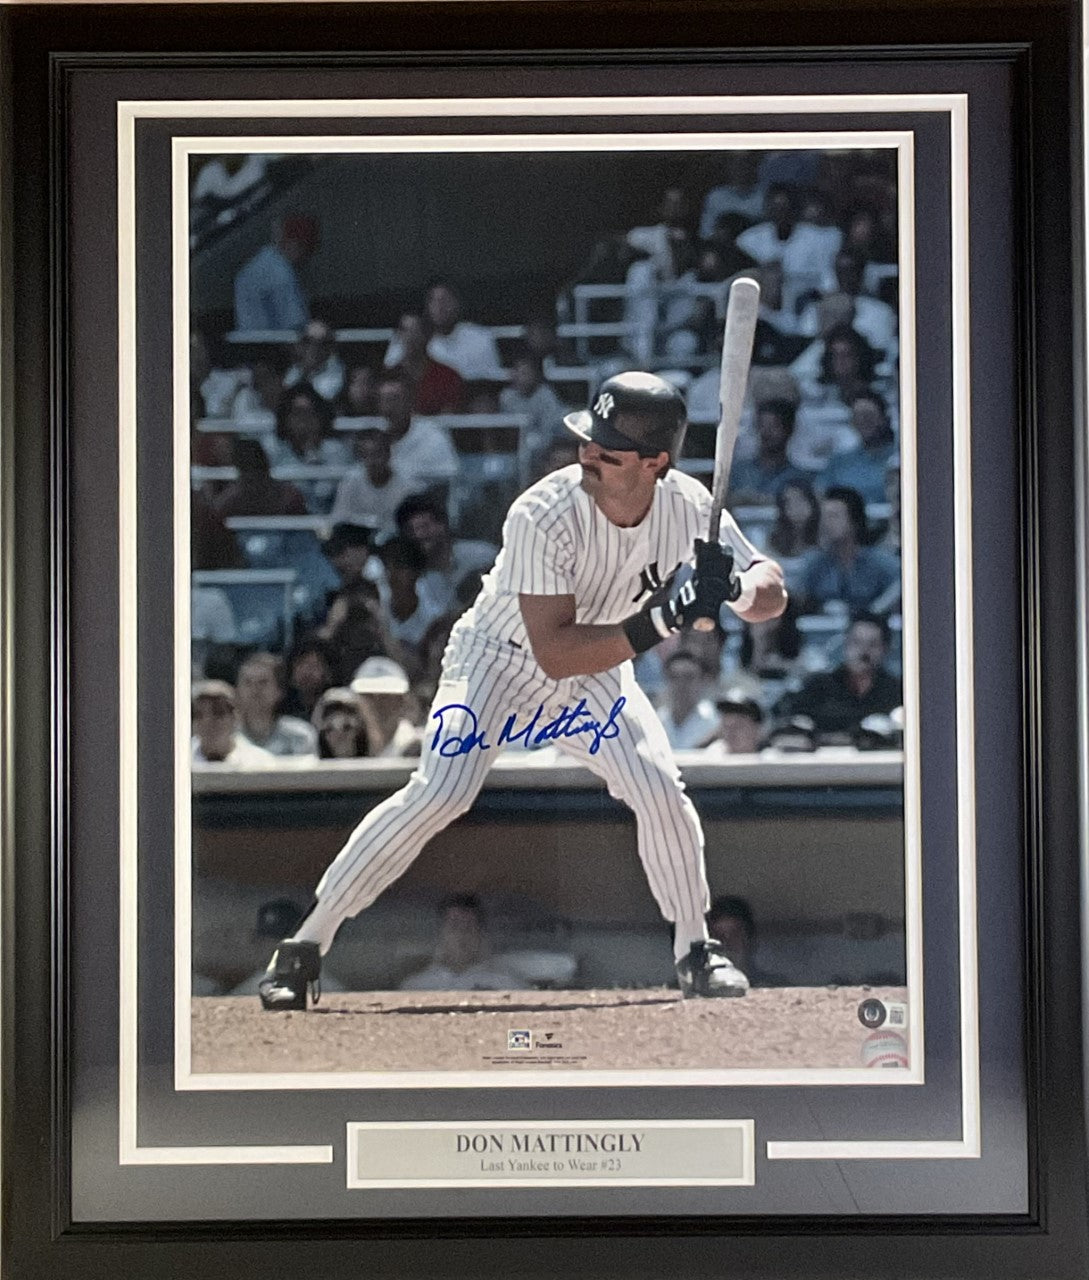 Don Mattingly New York Yankees Autographed 16x20 Photo Framed